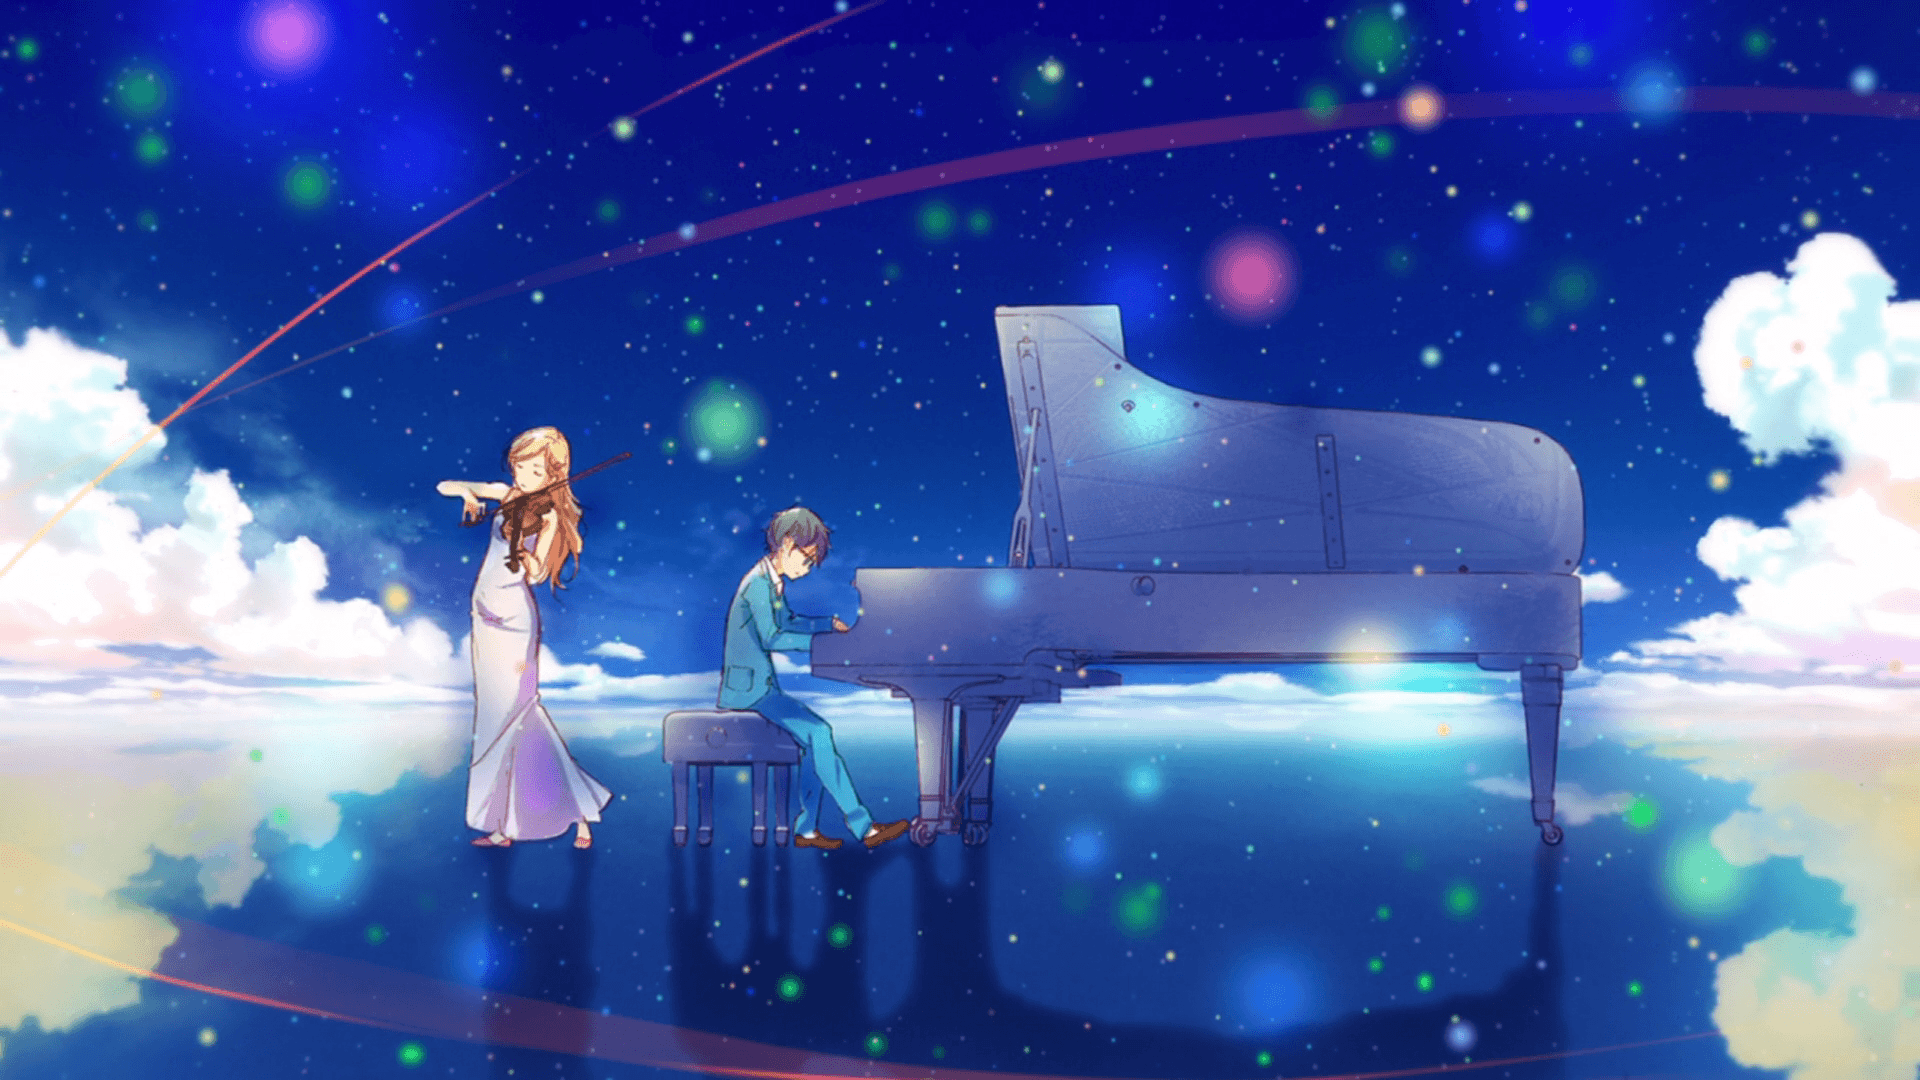 Your Lie in April Anime Wallpapers.